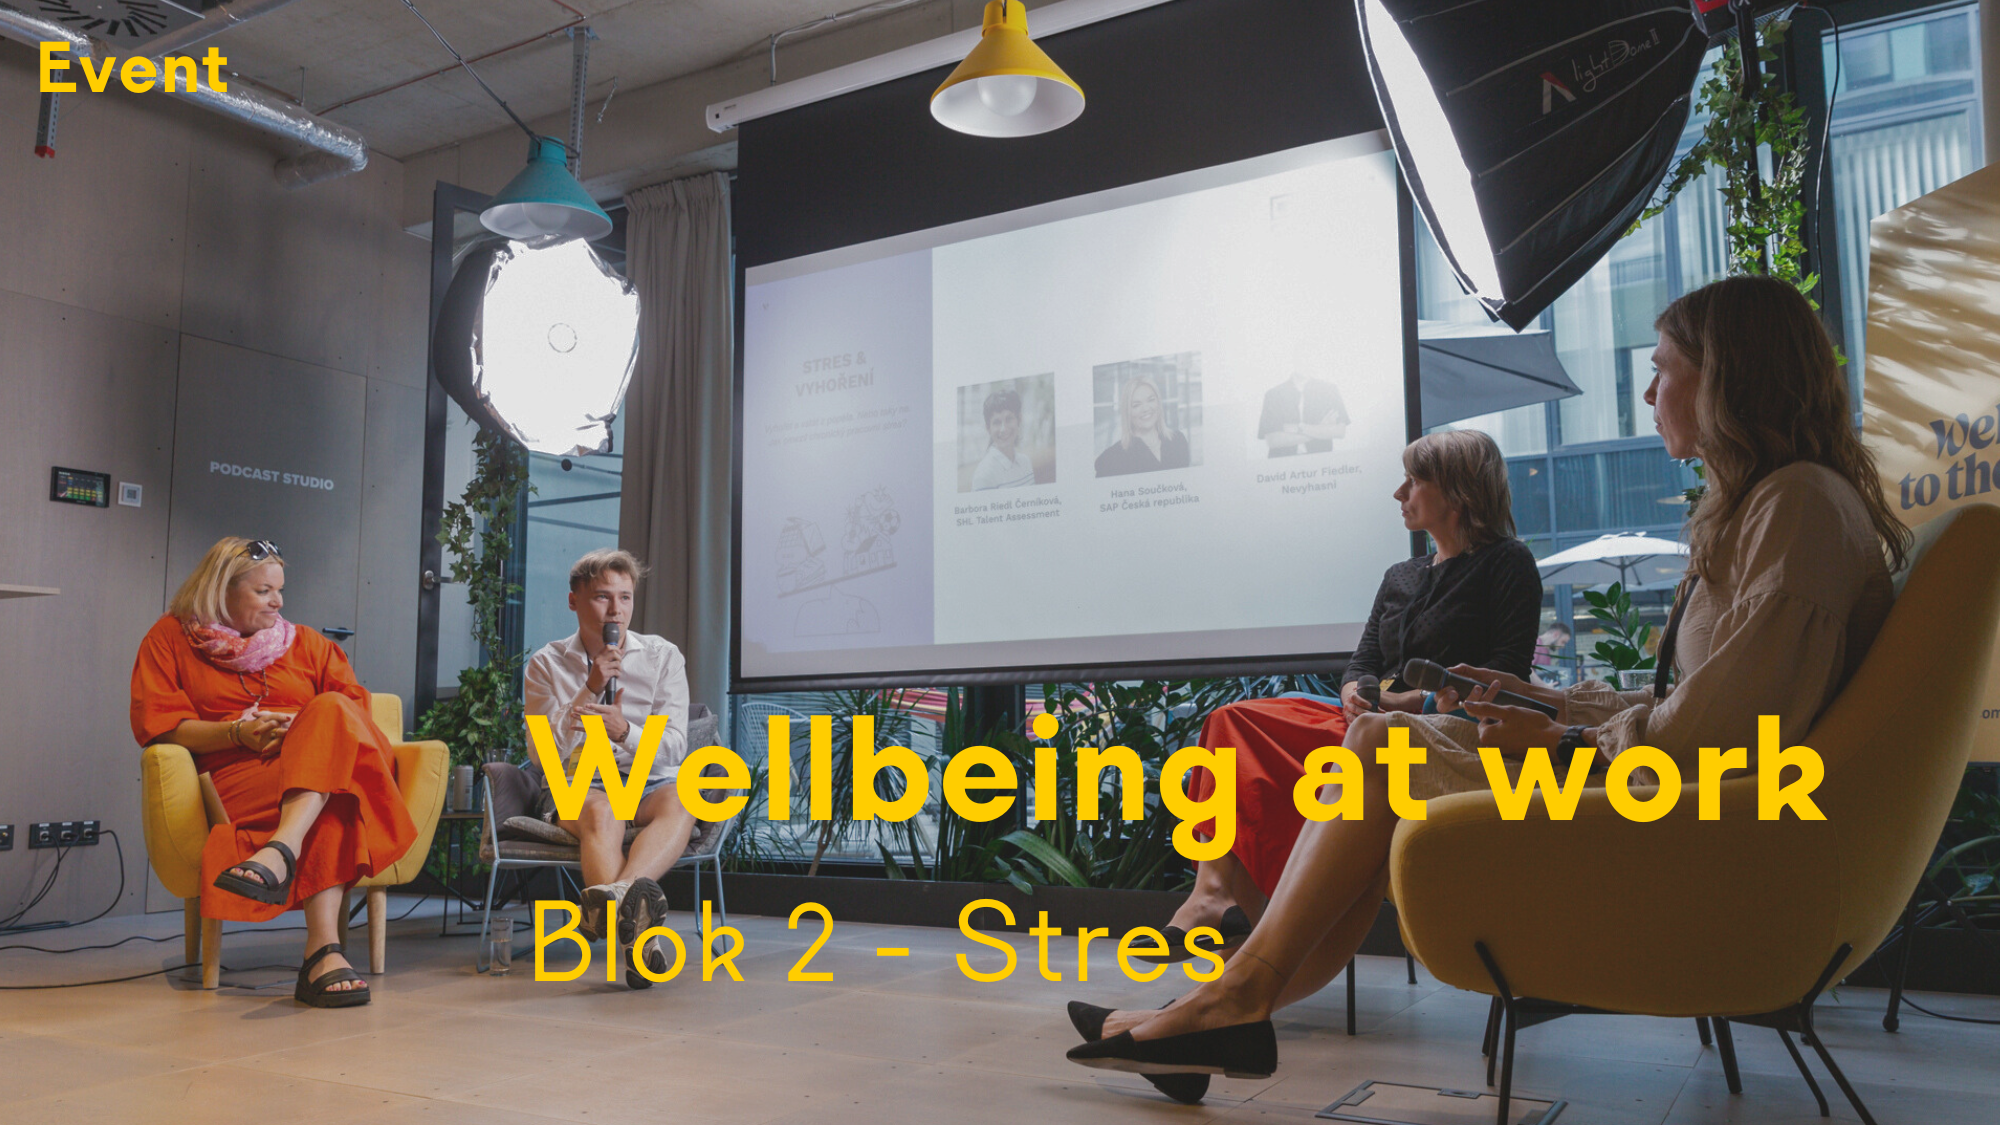 Wellbeing at work - Stres